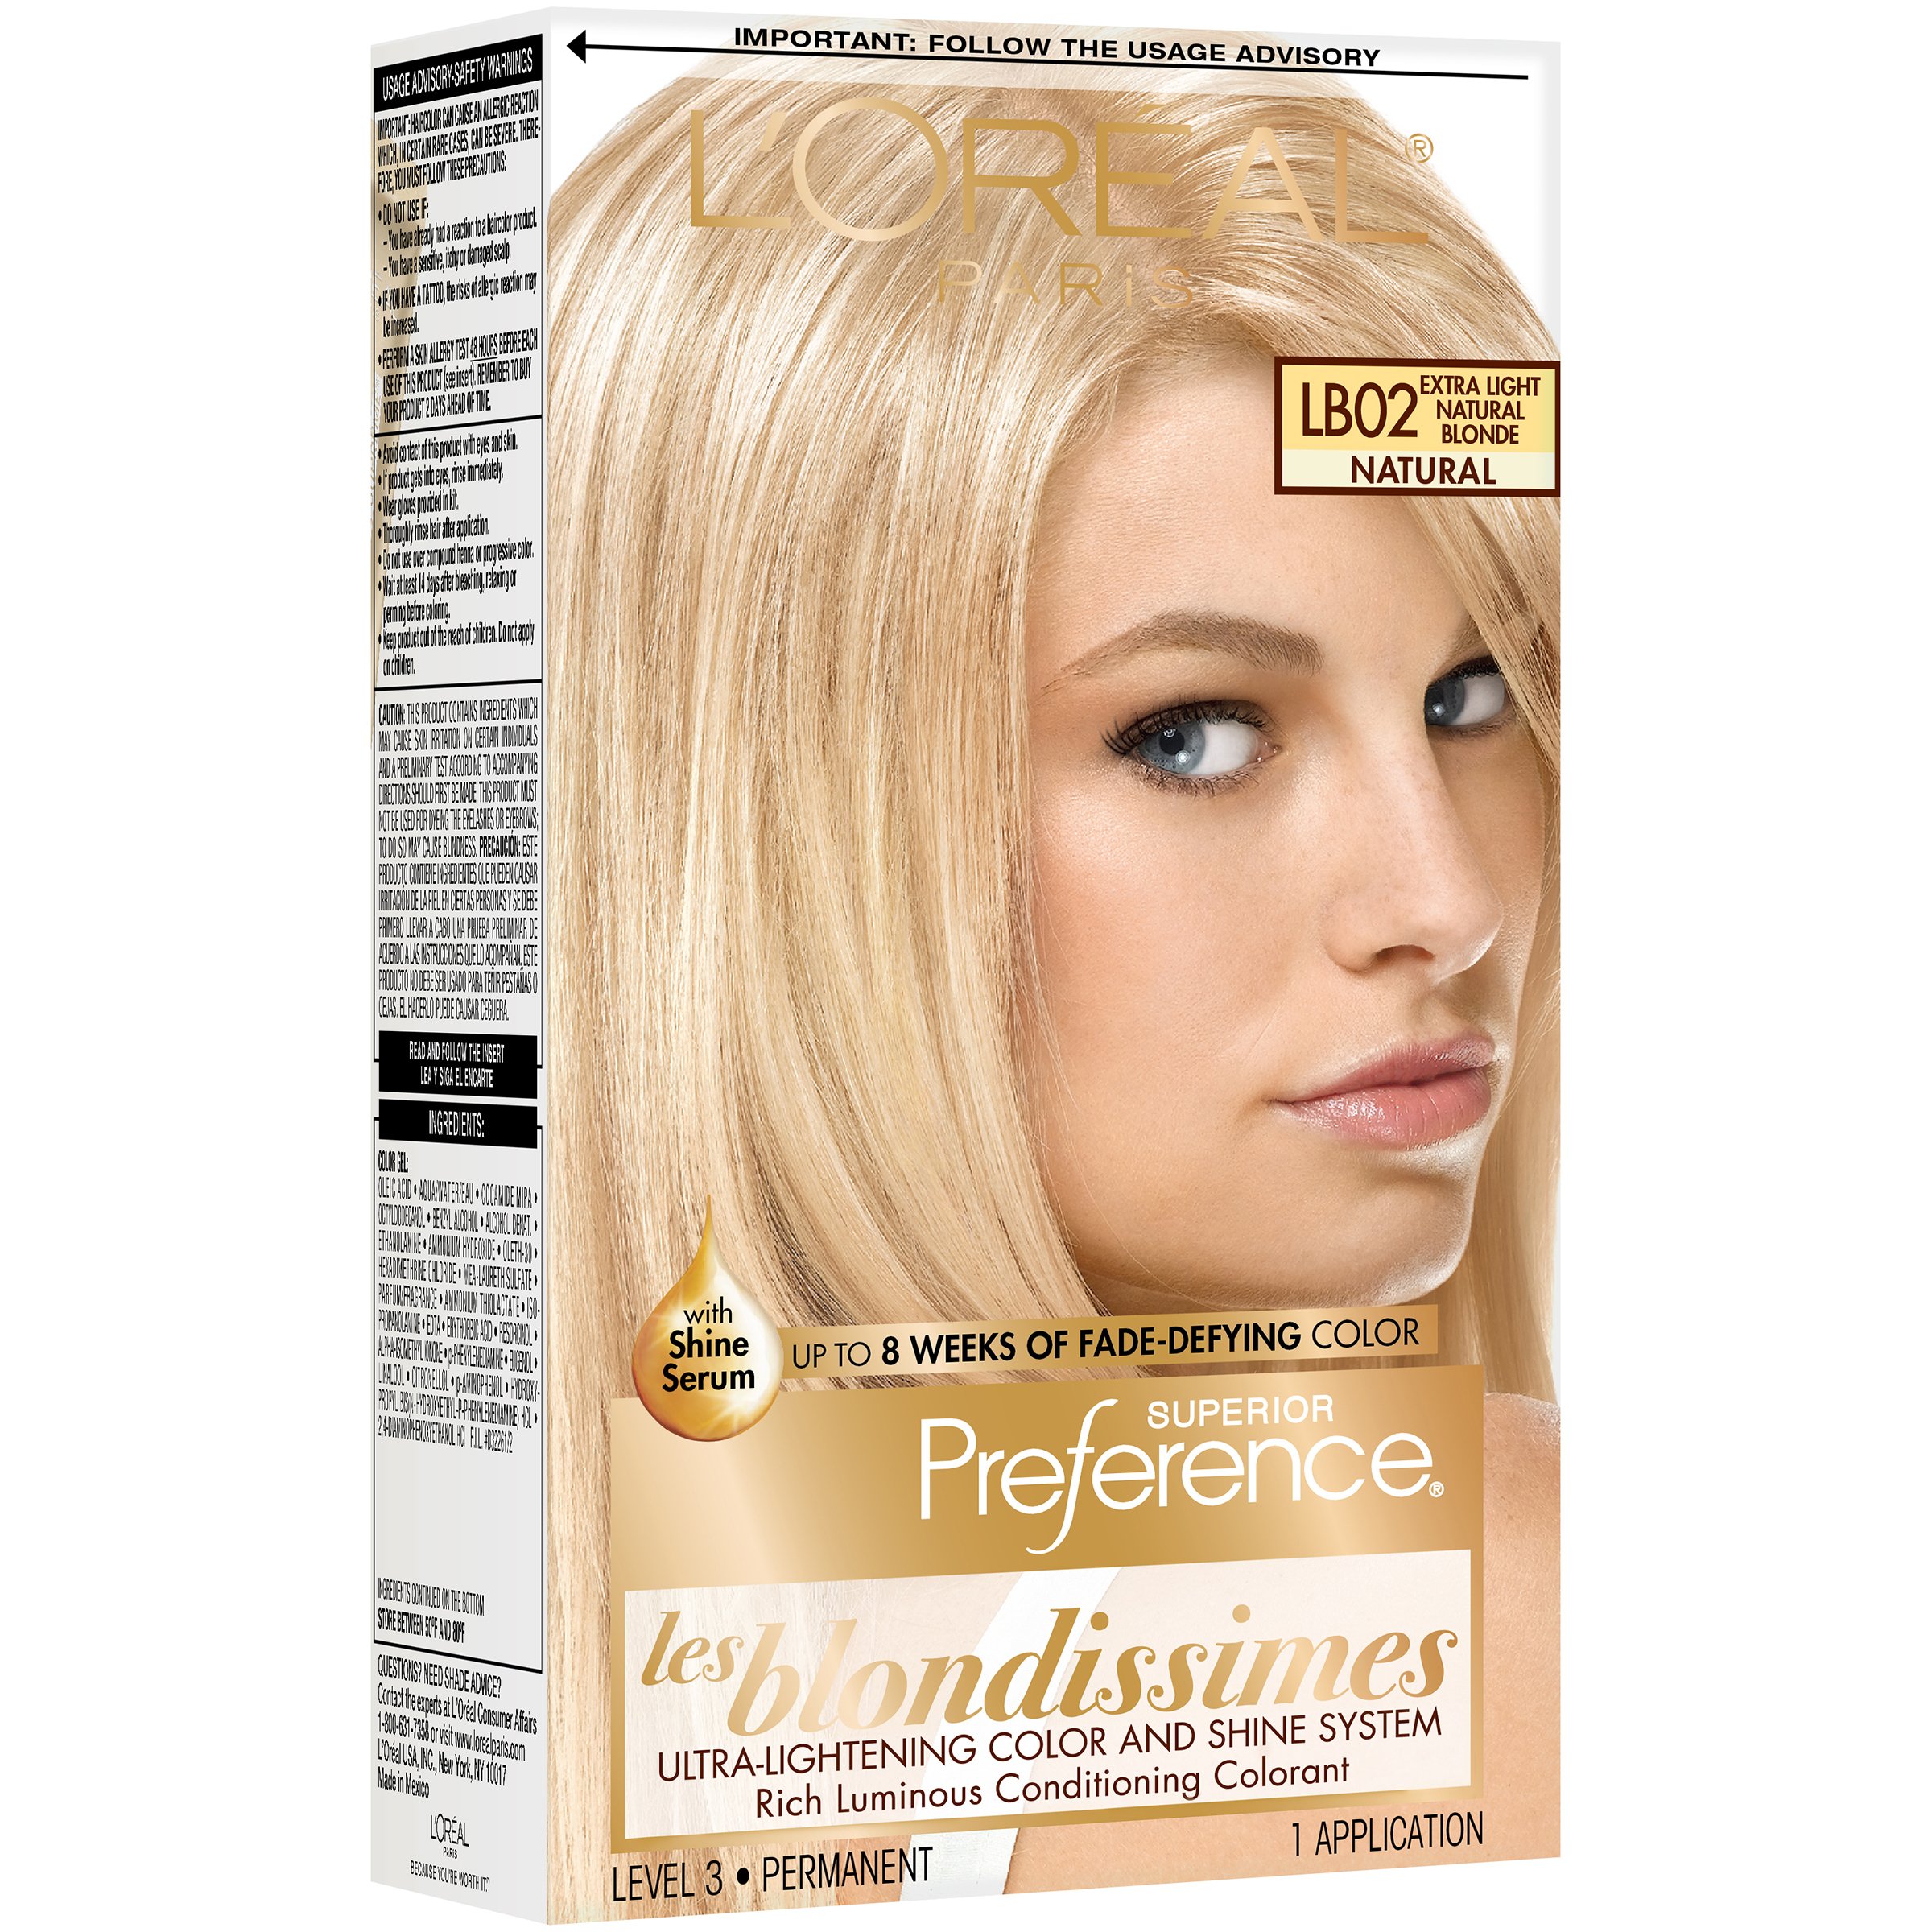 l-oreal-paris-superior-preference-hair-color-b-my-xxx-hot-girl